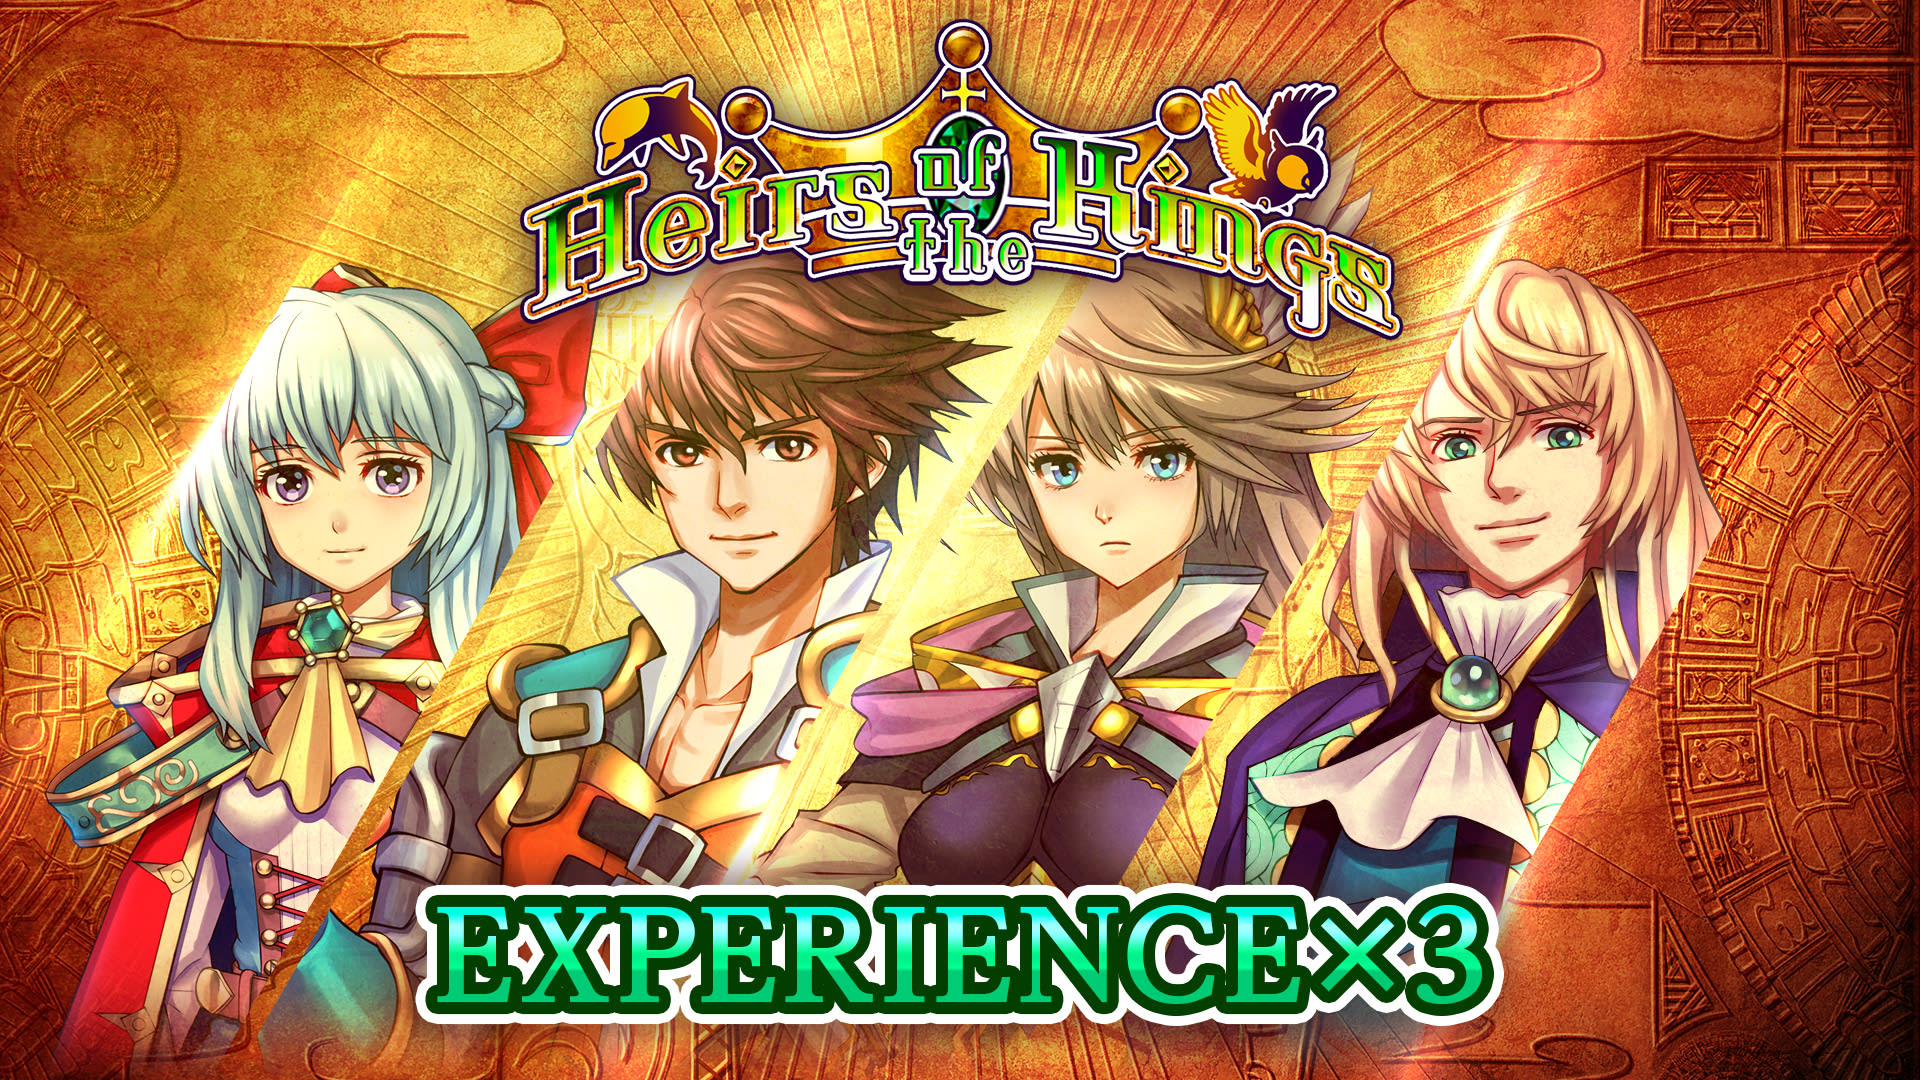 Experience x3 - Heirs of the Kings